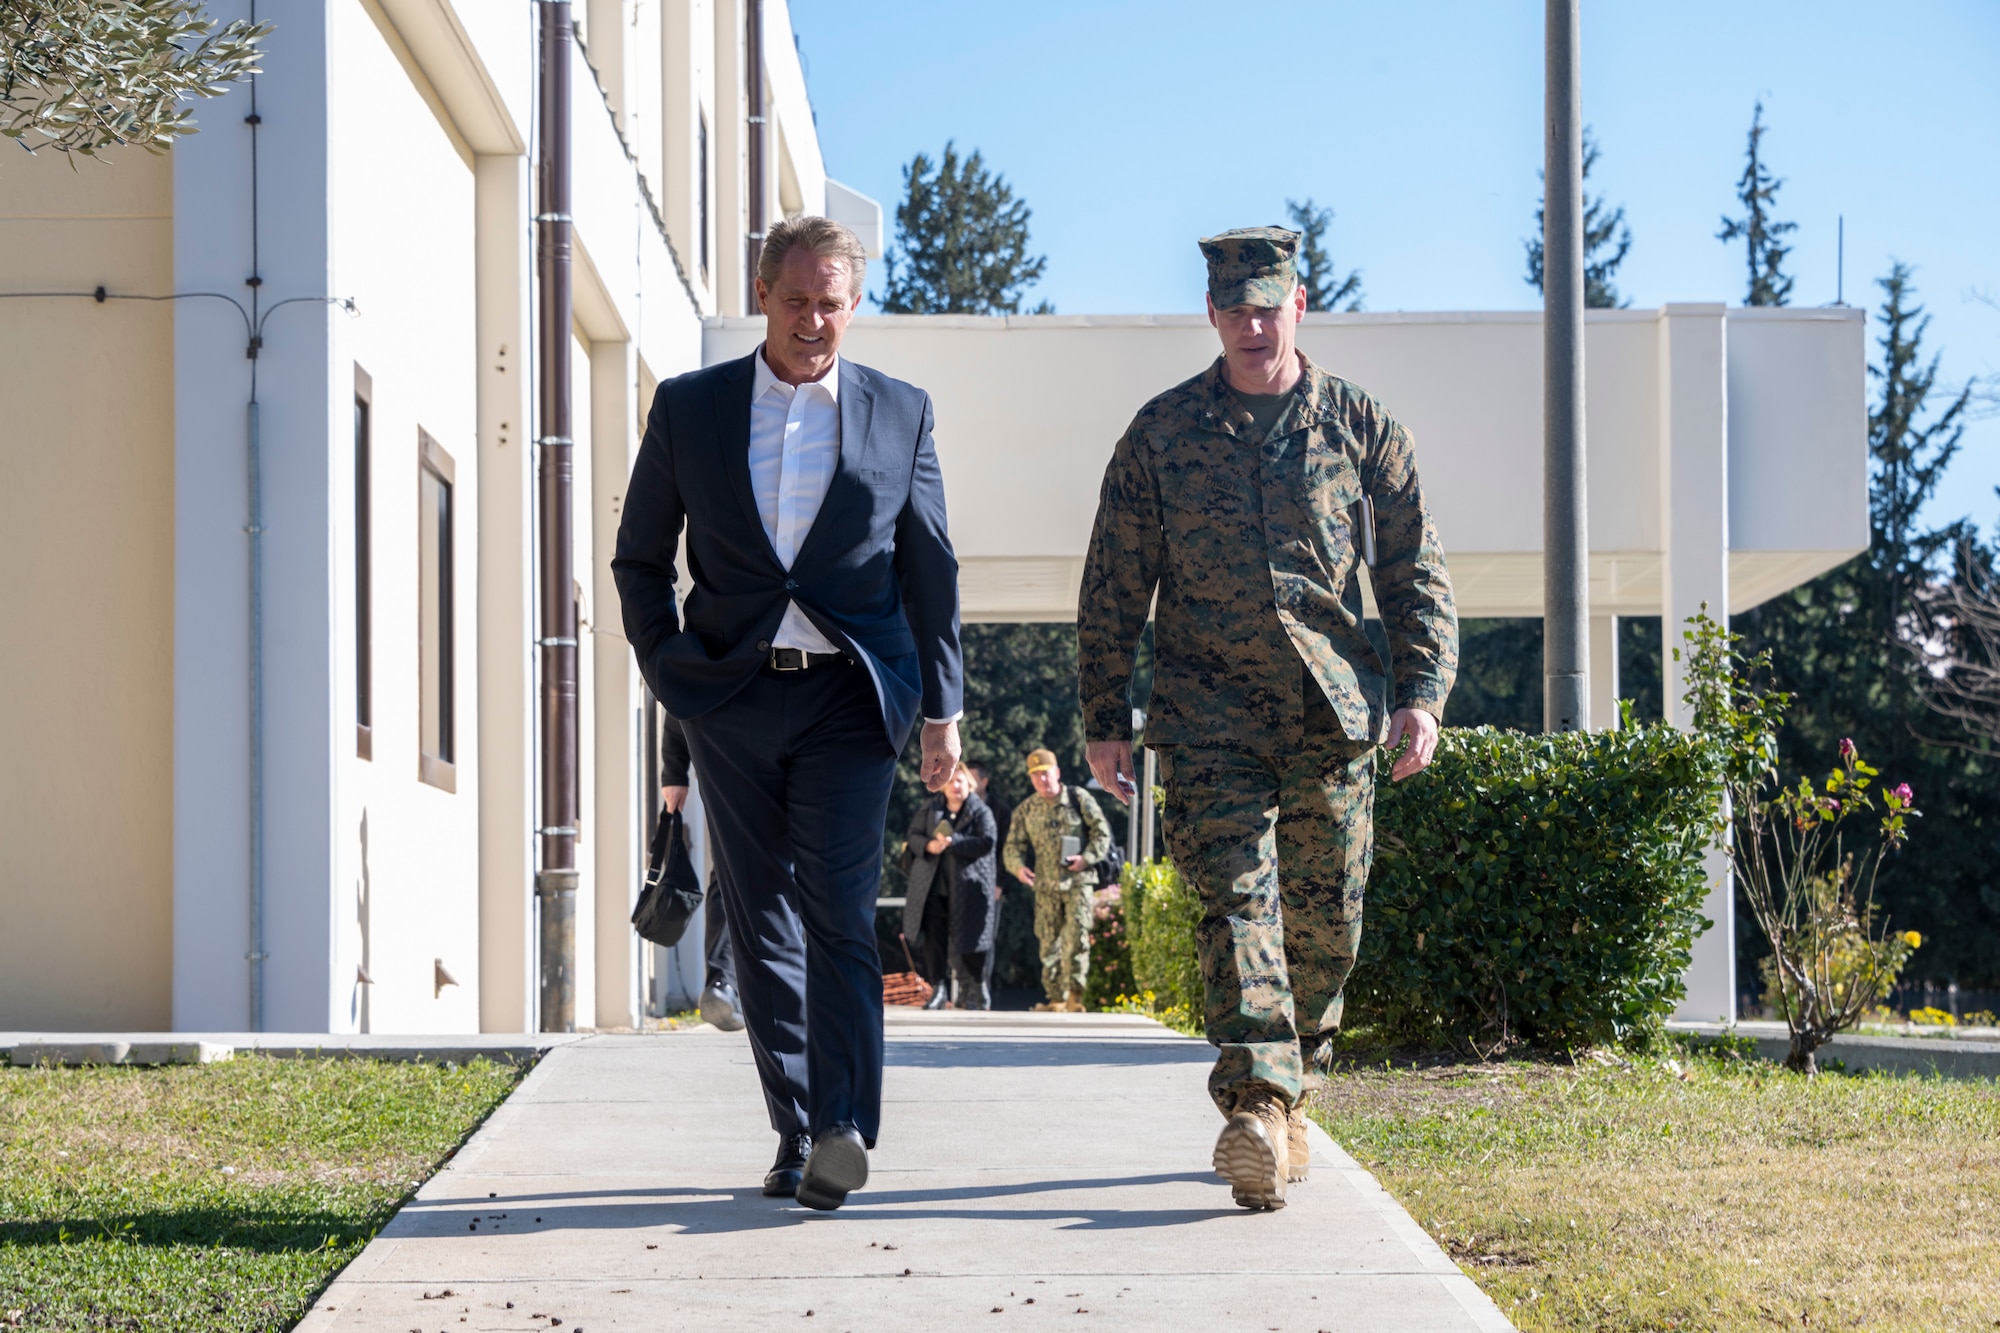 U.S. Ambassador Jeffry Flake, U.S. Ambassador to Türkiye, left, walks with U.S. Marine Corps Brig. Gen. Andrew Priddy, Task Force 61/2 commanding general, right, during his visit to Incirlik Air Base, Türkiye, Feb 13, 2023. Ambassador Flake visited Incirlik AB to discuss the recent earthquakes that struck central-southern Türkiye on Feb 6, 2023, and see the humanitarian support efforts first-hand. As Ambassador to Türkiye, Flake holds the highest civilian position as The Chief of Mission, and impacts the communication and resources of U.S. personnel, advancing the U.S. foreign policy goals. As a fellow NATO ally, the U.S. Government mobilized personnel to assist Türkiye in their response efforts. (U.S. Air Force photo by Senior Airman David D. McLoney)